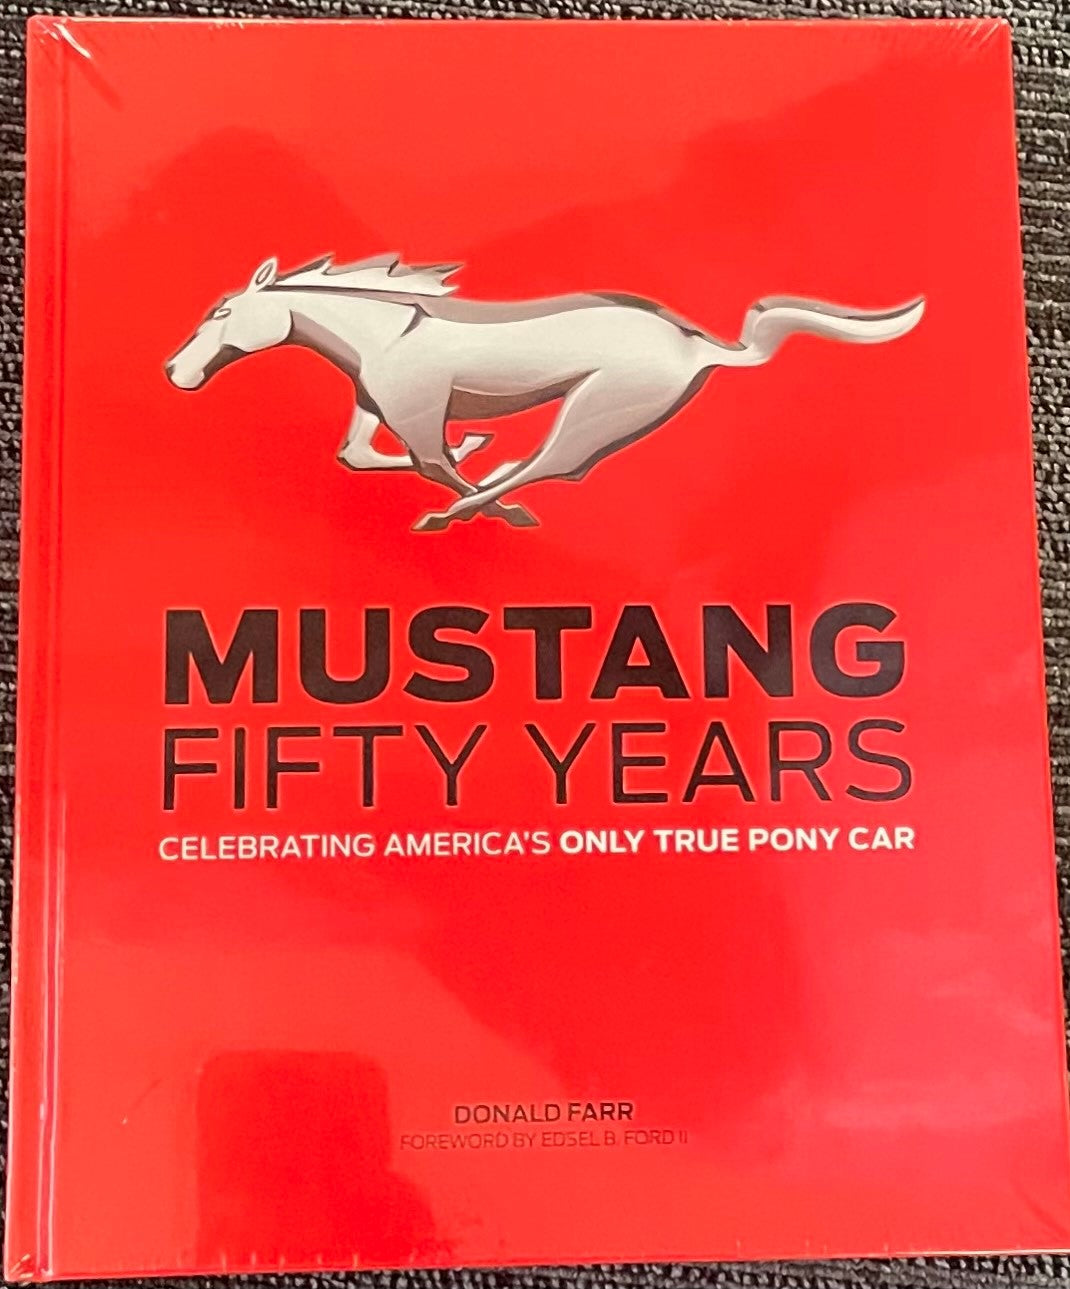 Mustang Fifty Years Book